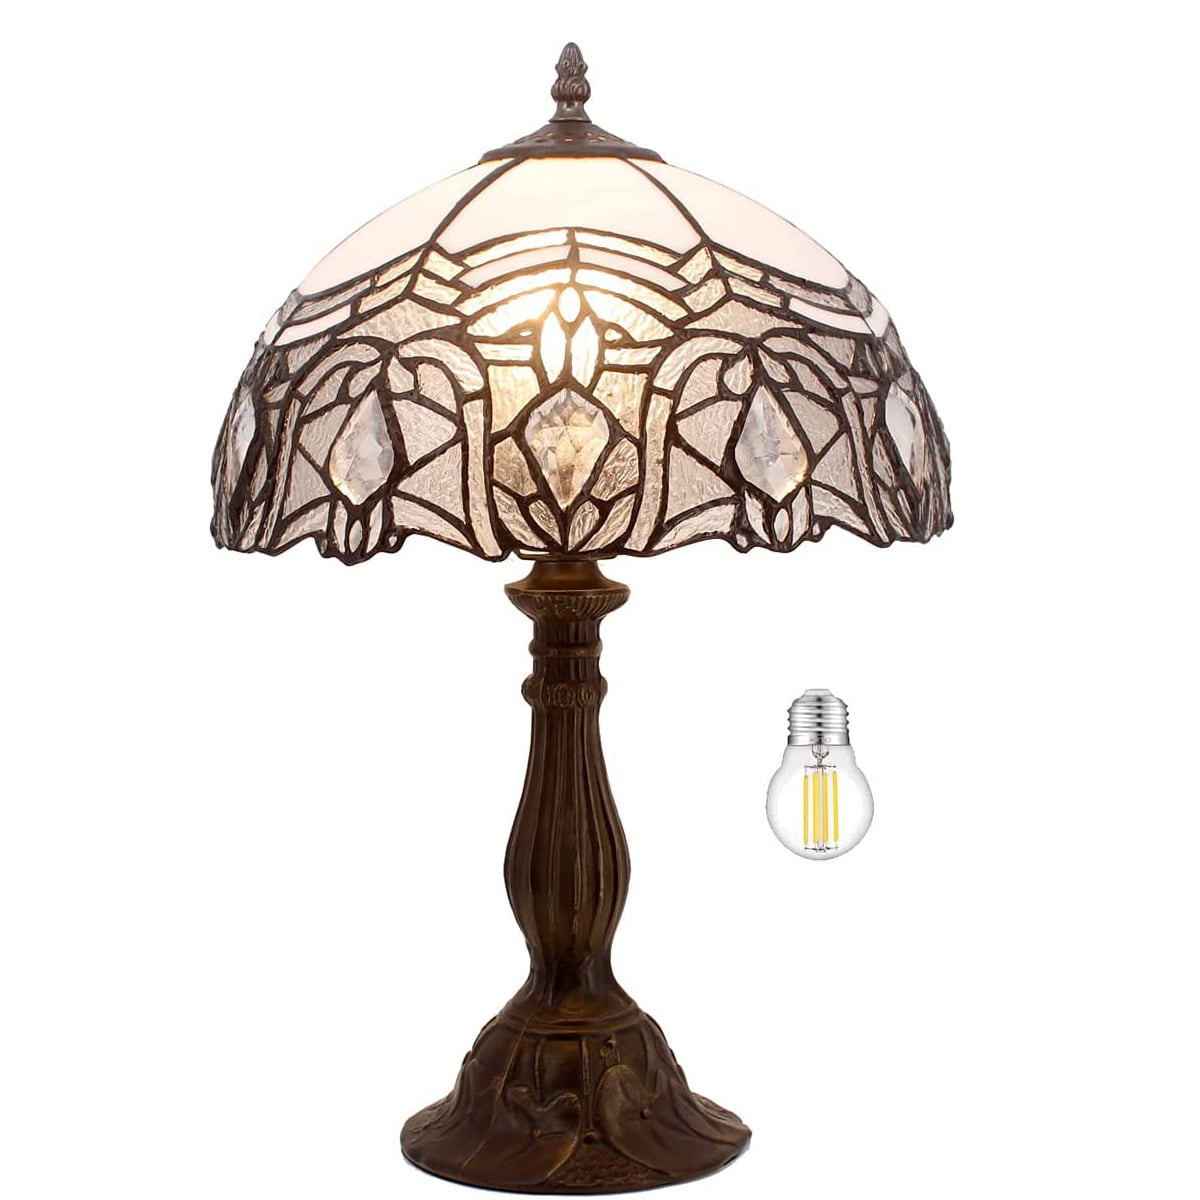  Lamp Stained Galss Crystal Style Table Desk Reading Light W12H18 Inch Tall S508W WERFACTORY LAMPS Parent Friend Kid Lover Living Room Bedroom Study Office Coffee Bar Bedside Desk Antique Gifts